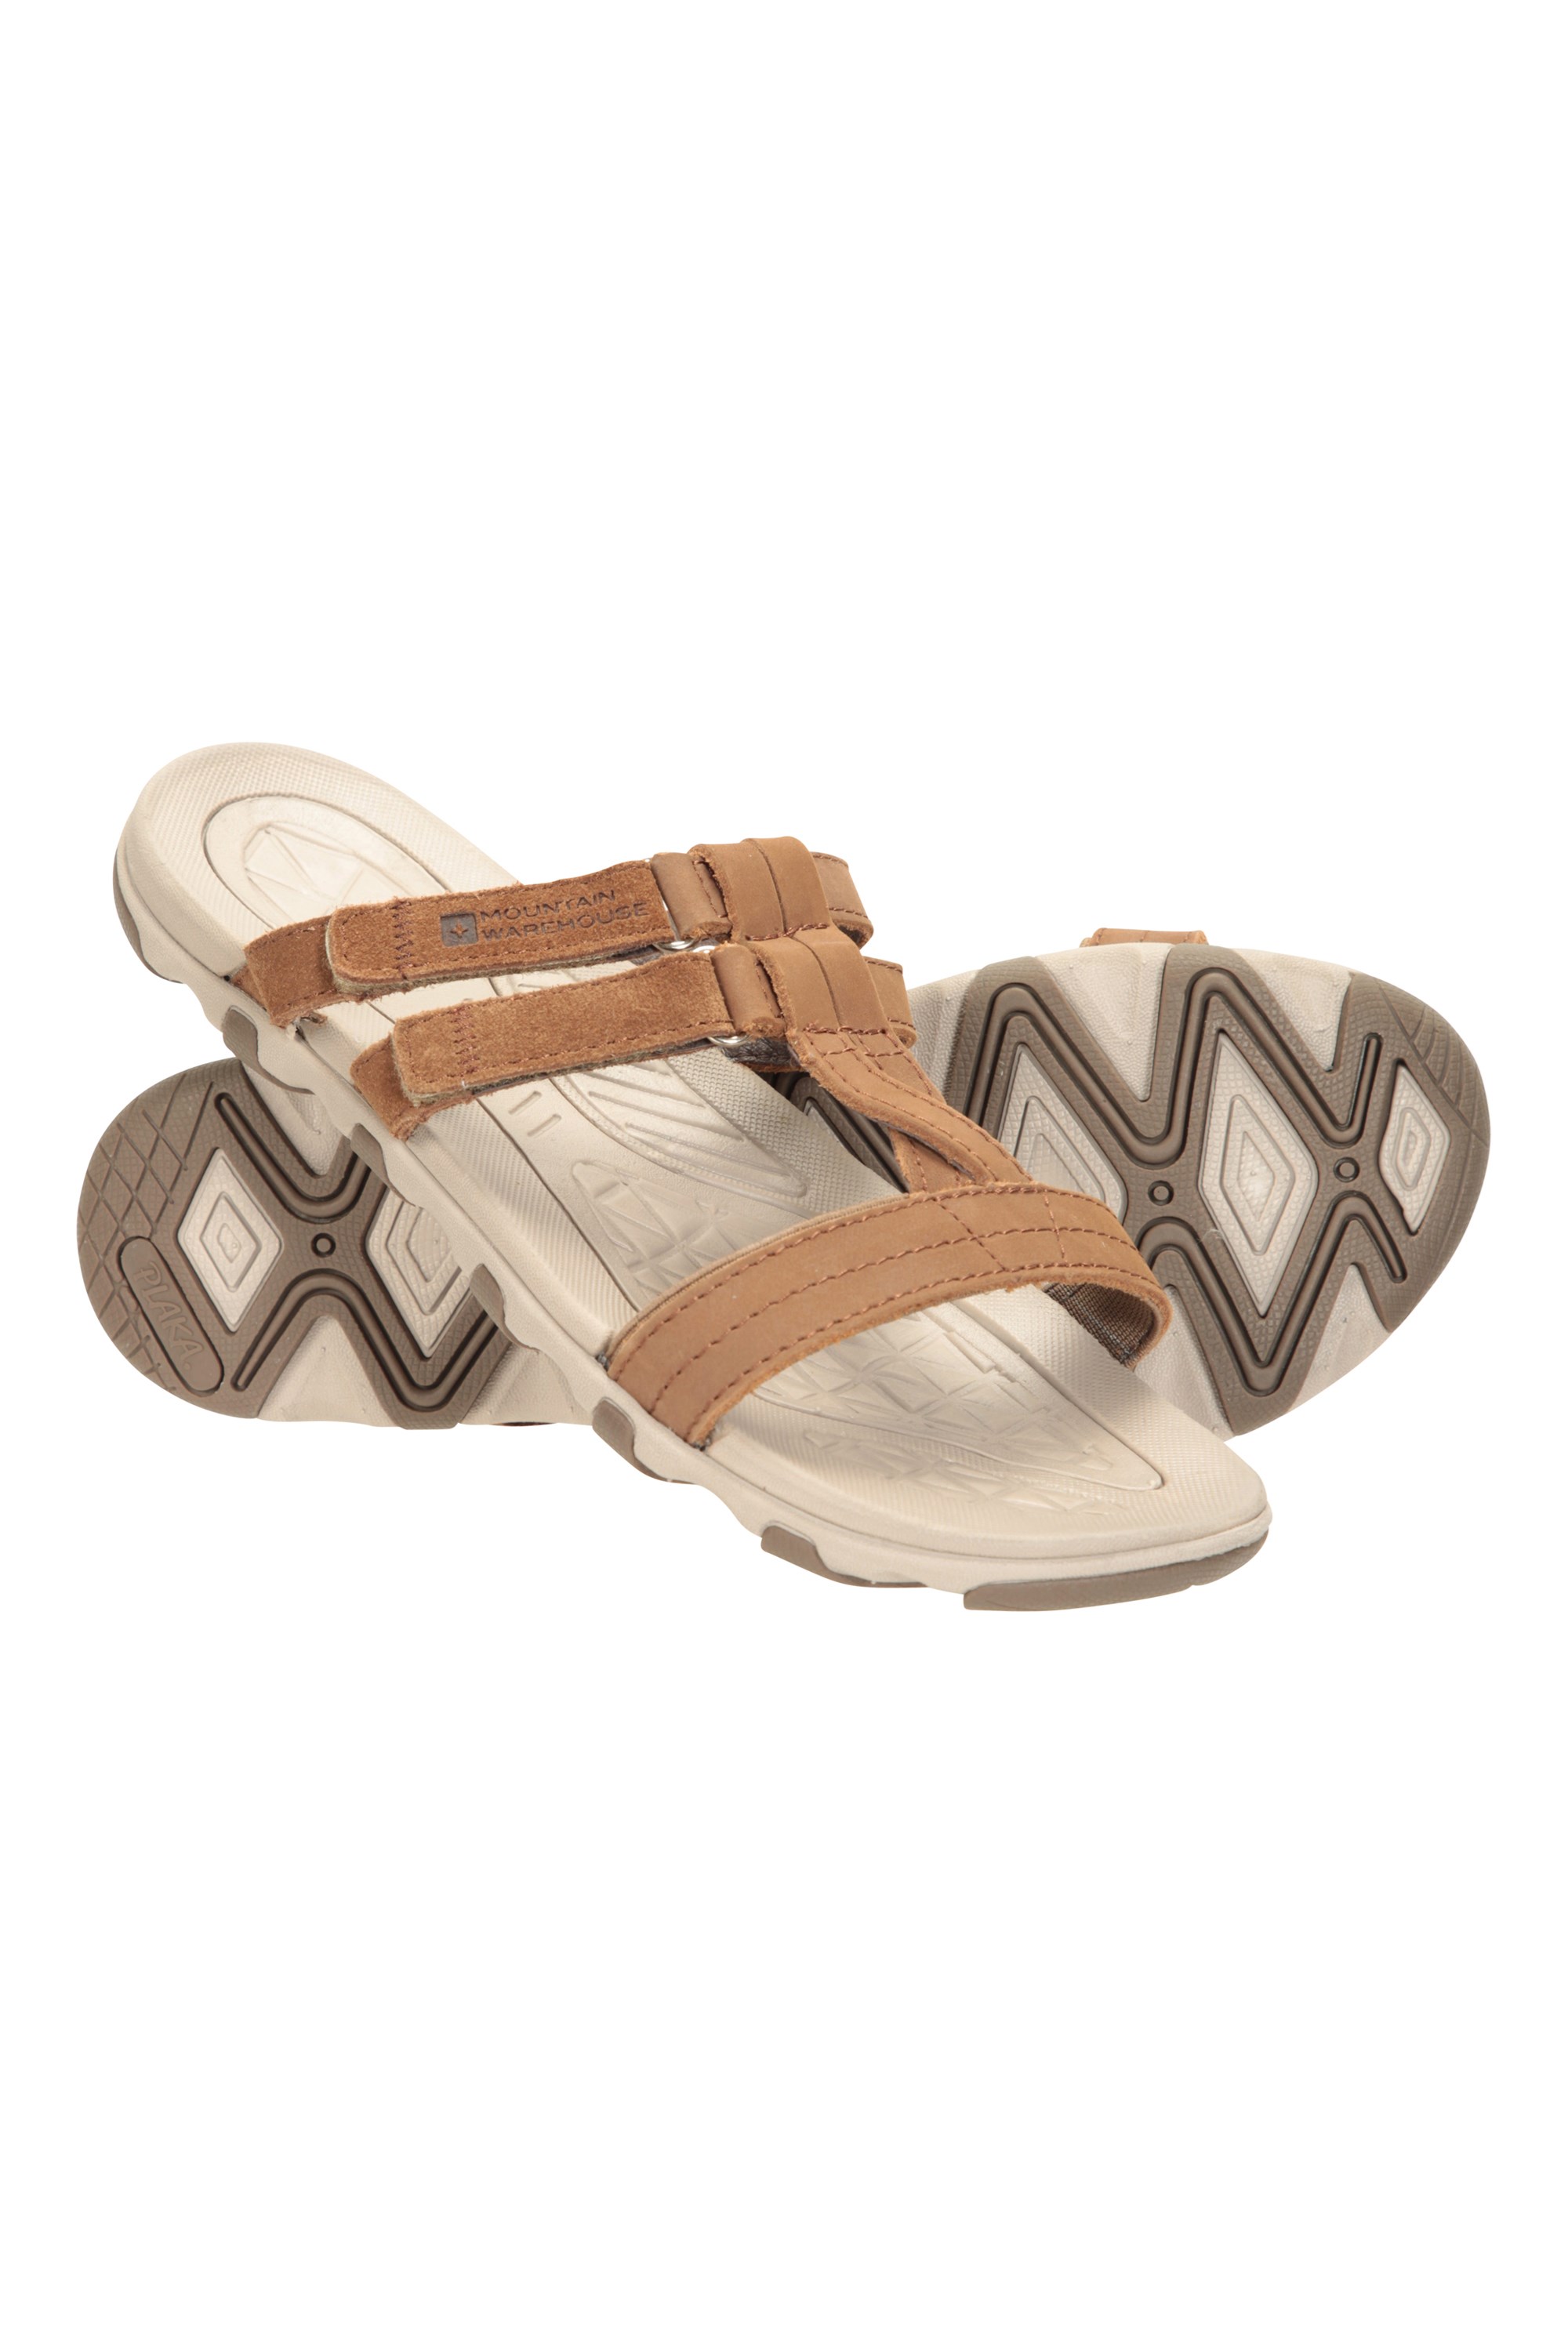 Mountain Warehouse - Cruise womens leather sandal - brown